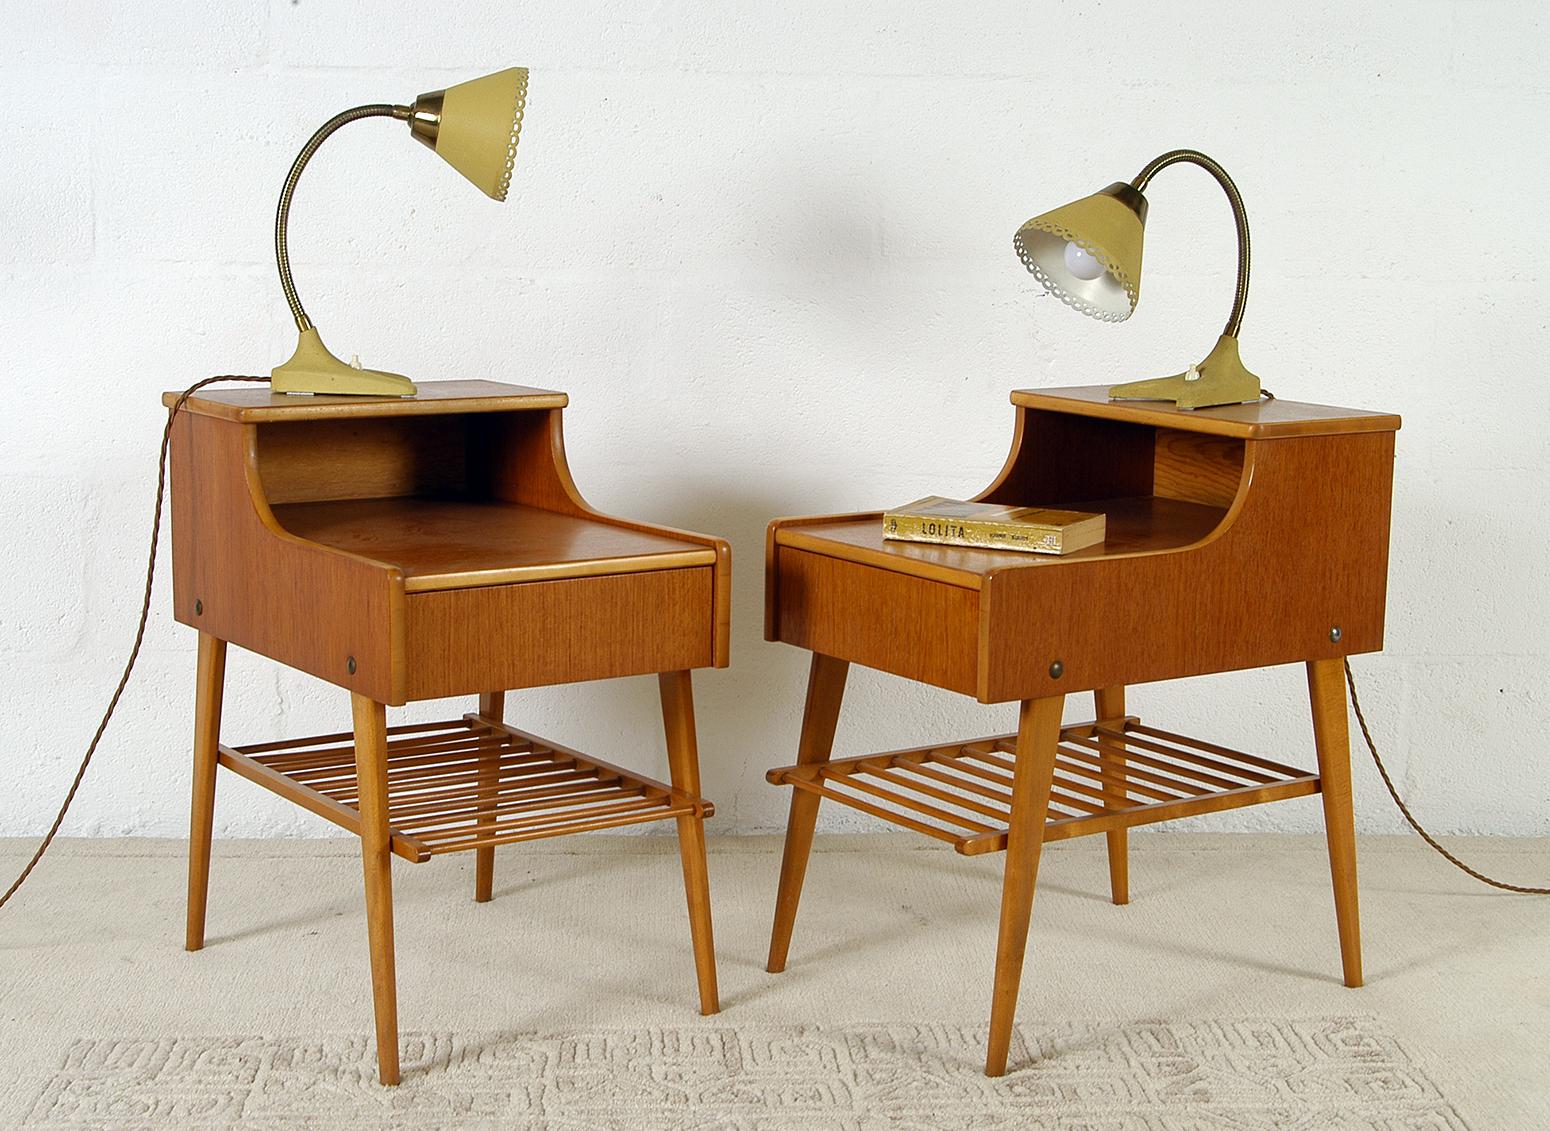 A good matched pair of two tier Swedish Modern teak and beech nightstands, standing on beech legs with a single drawer and beech magazine rack beneath. They are both in very nice condition and show only the slightest signs of wear. Photographed with